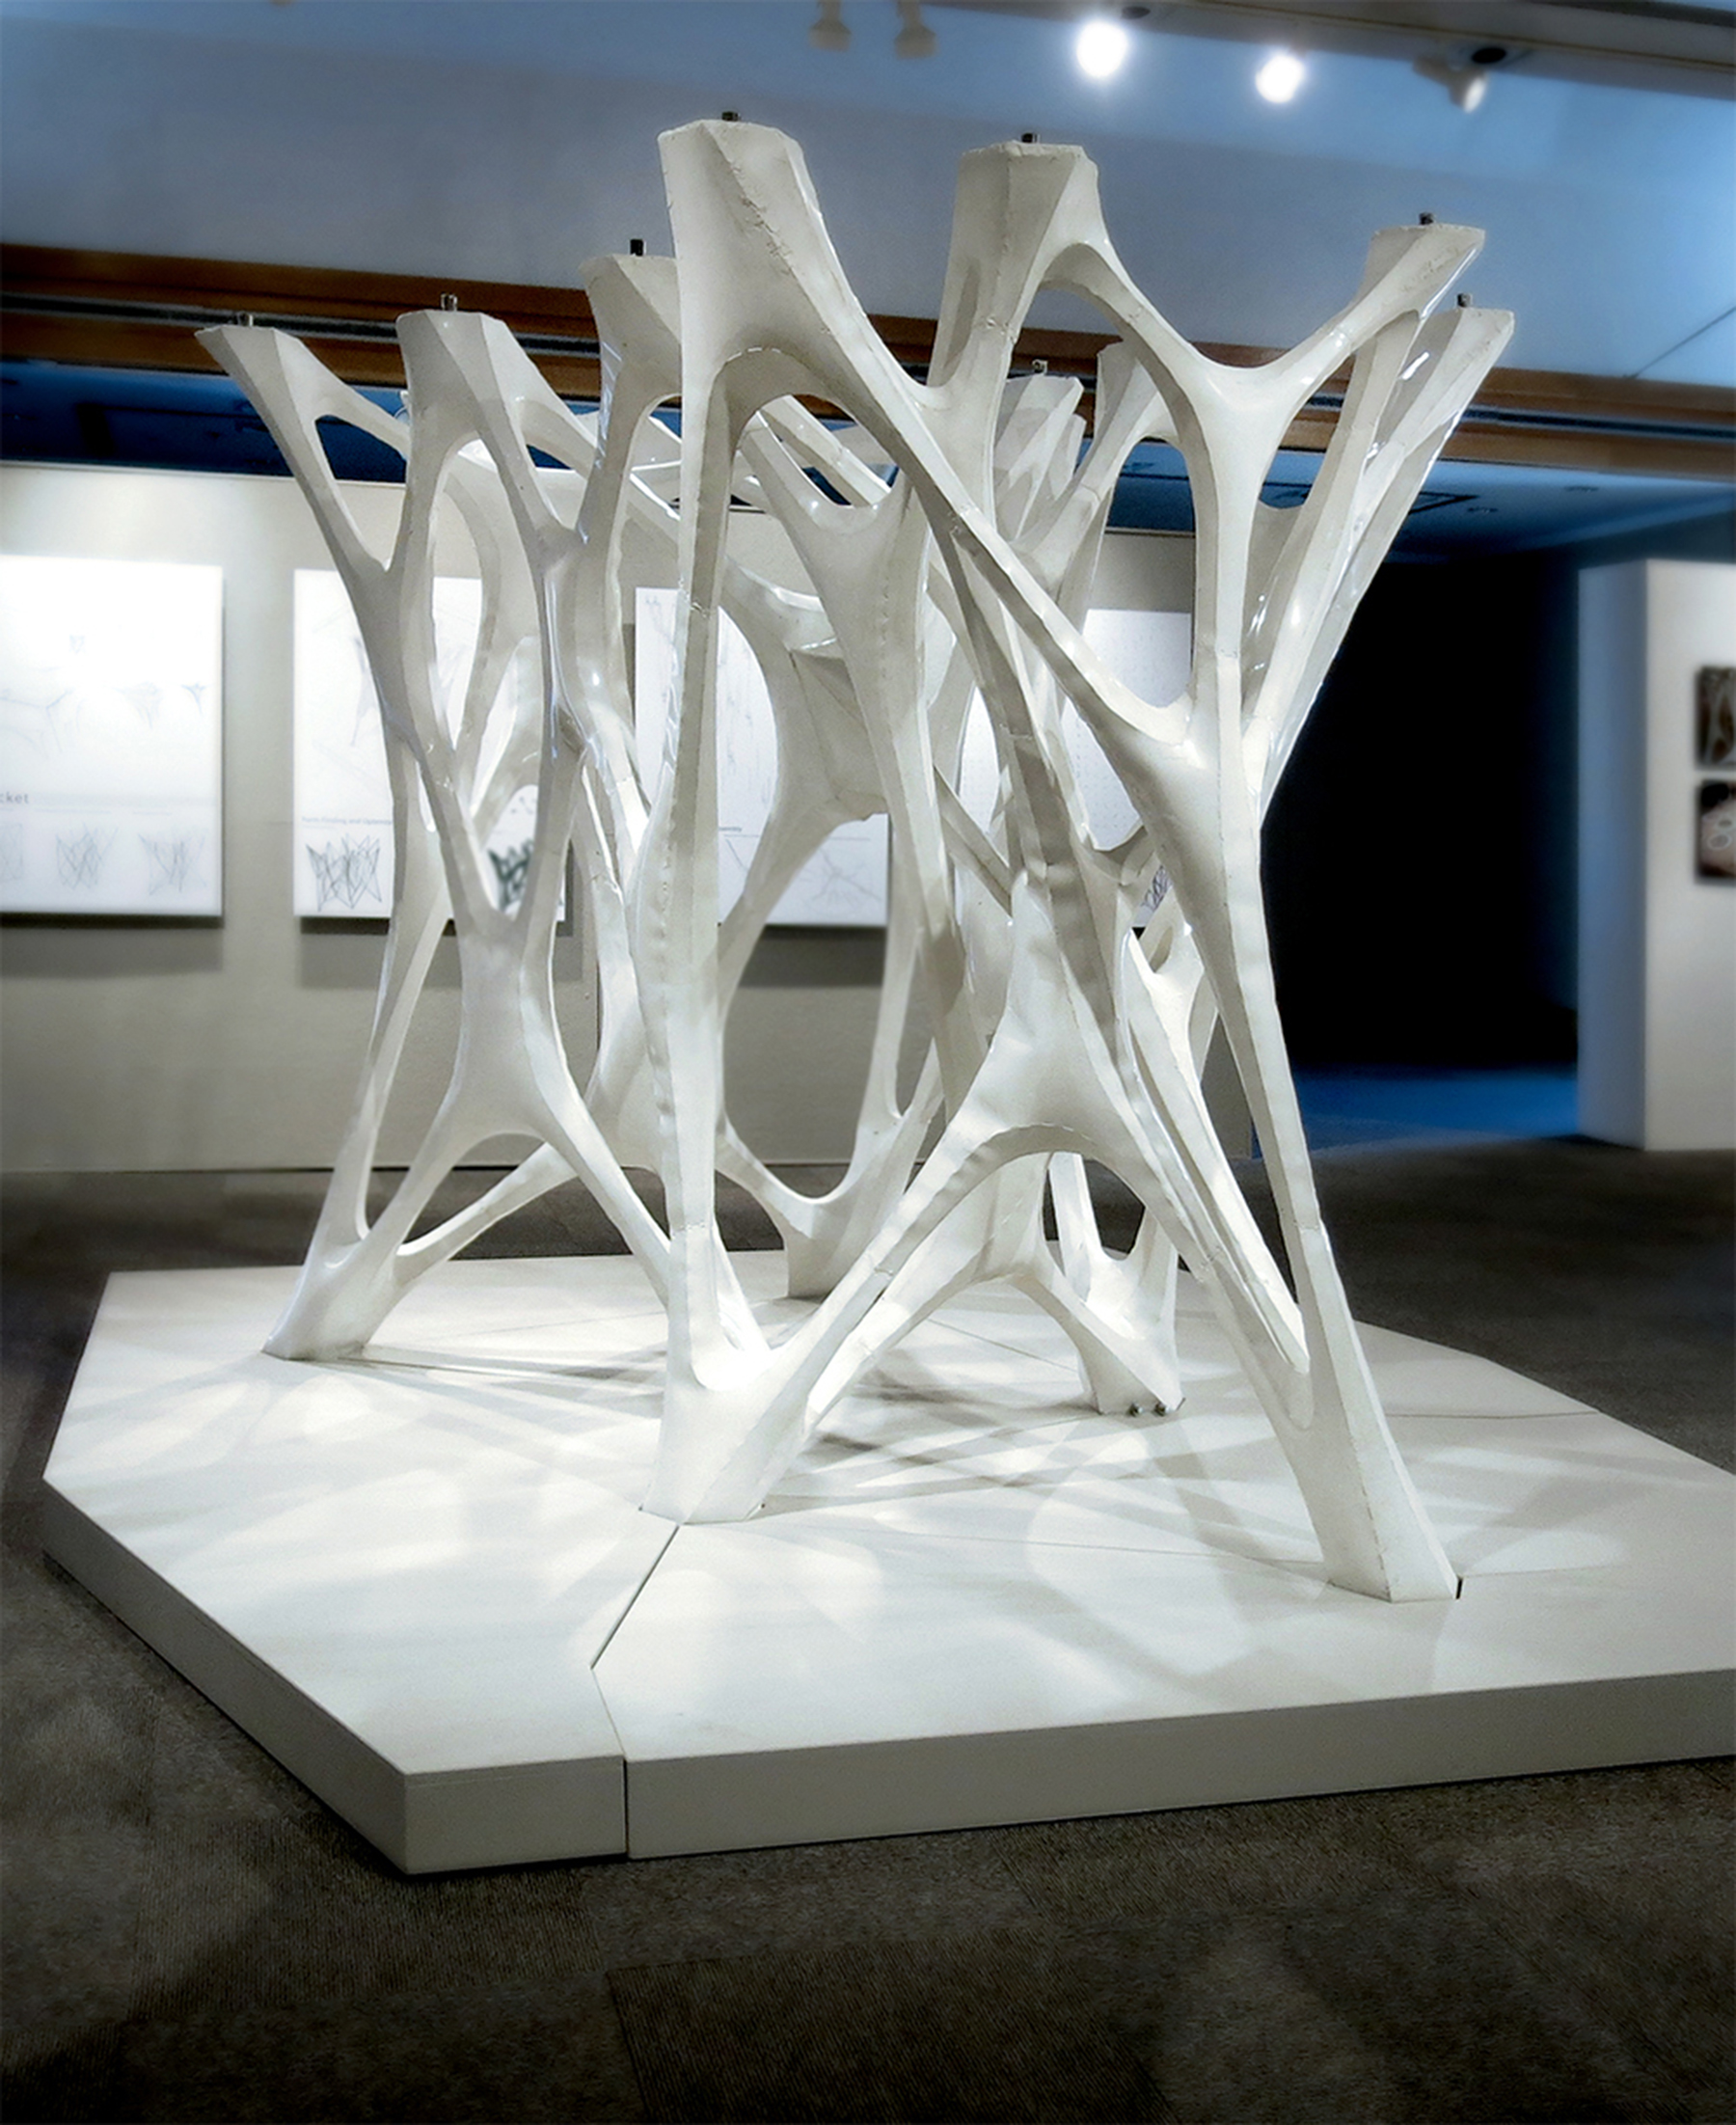 Full-scale prototypes in the Topocast Lab netted the finished Cast Thicket, shown here in the UT Arlington School of Architecture Gallery.